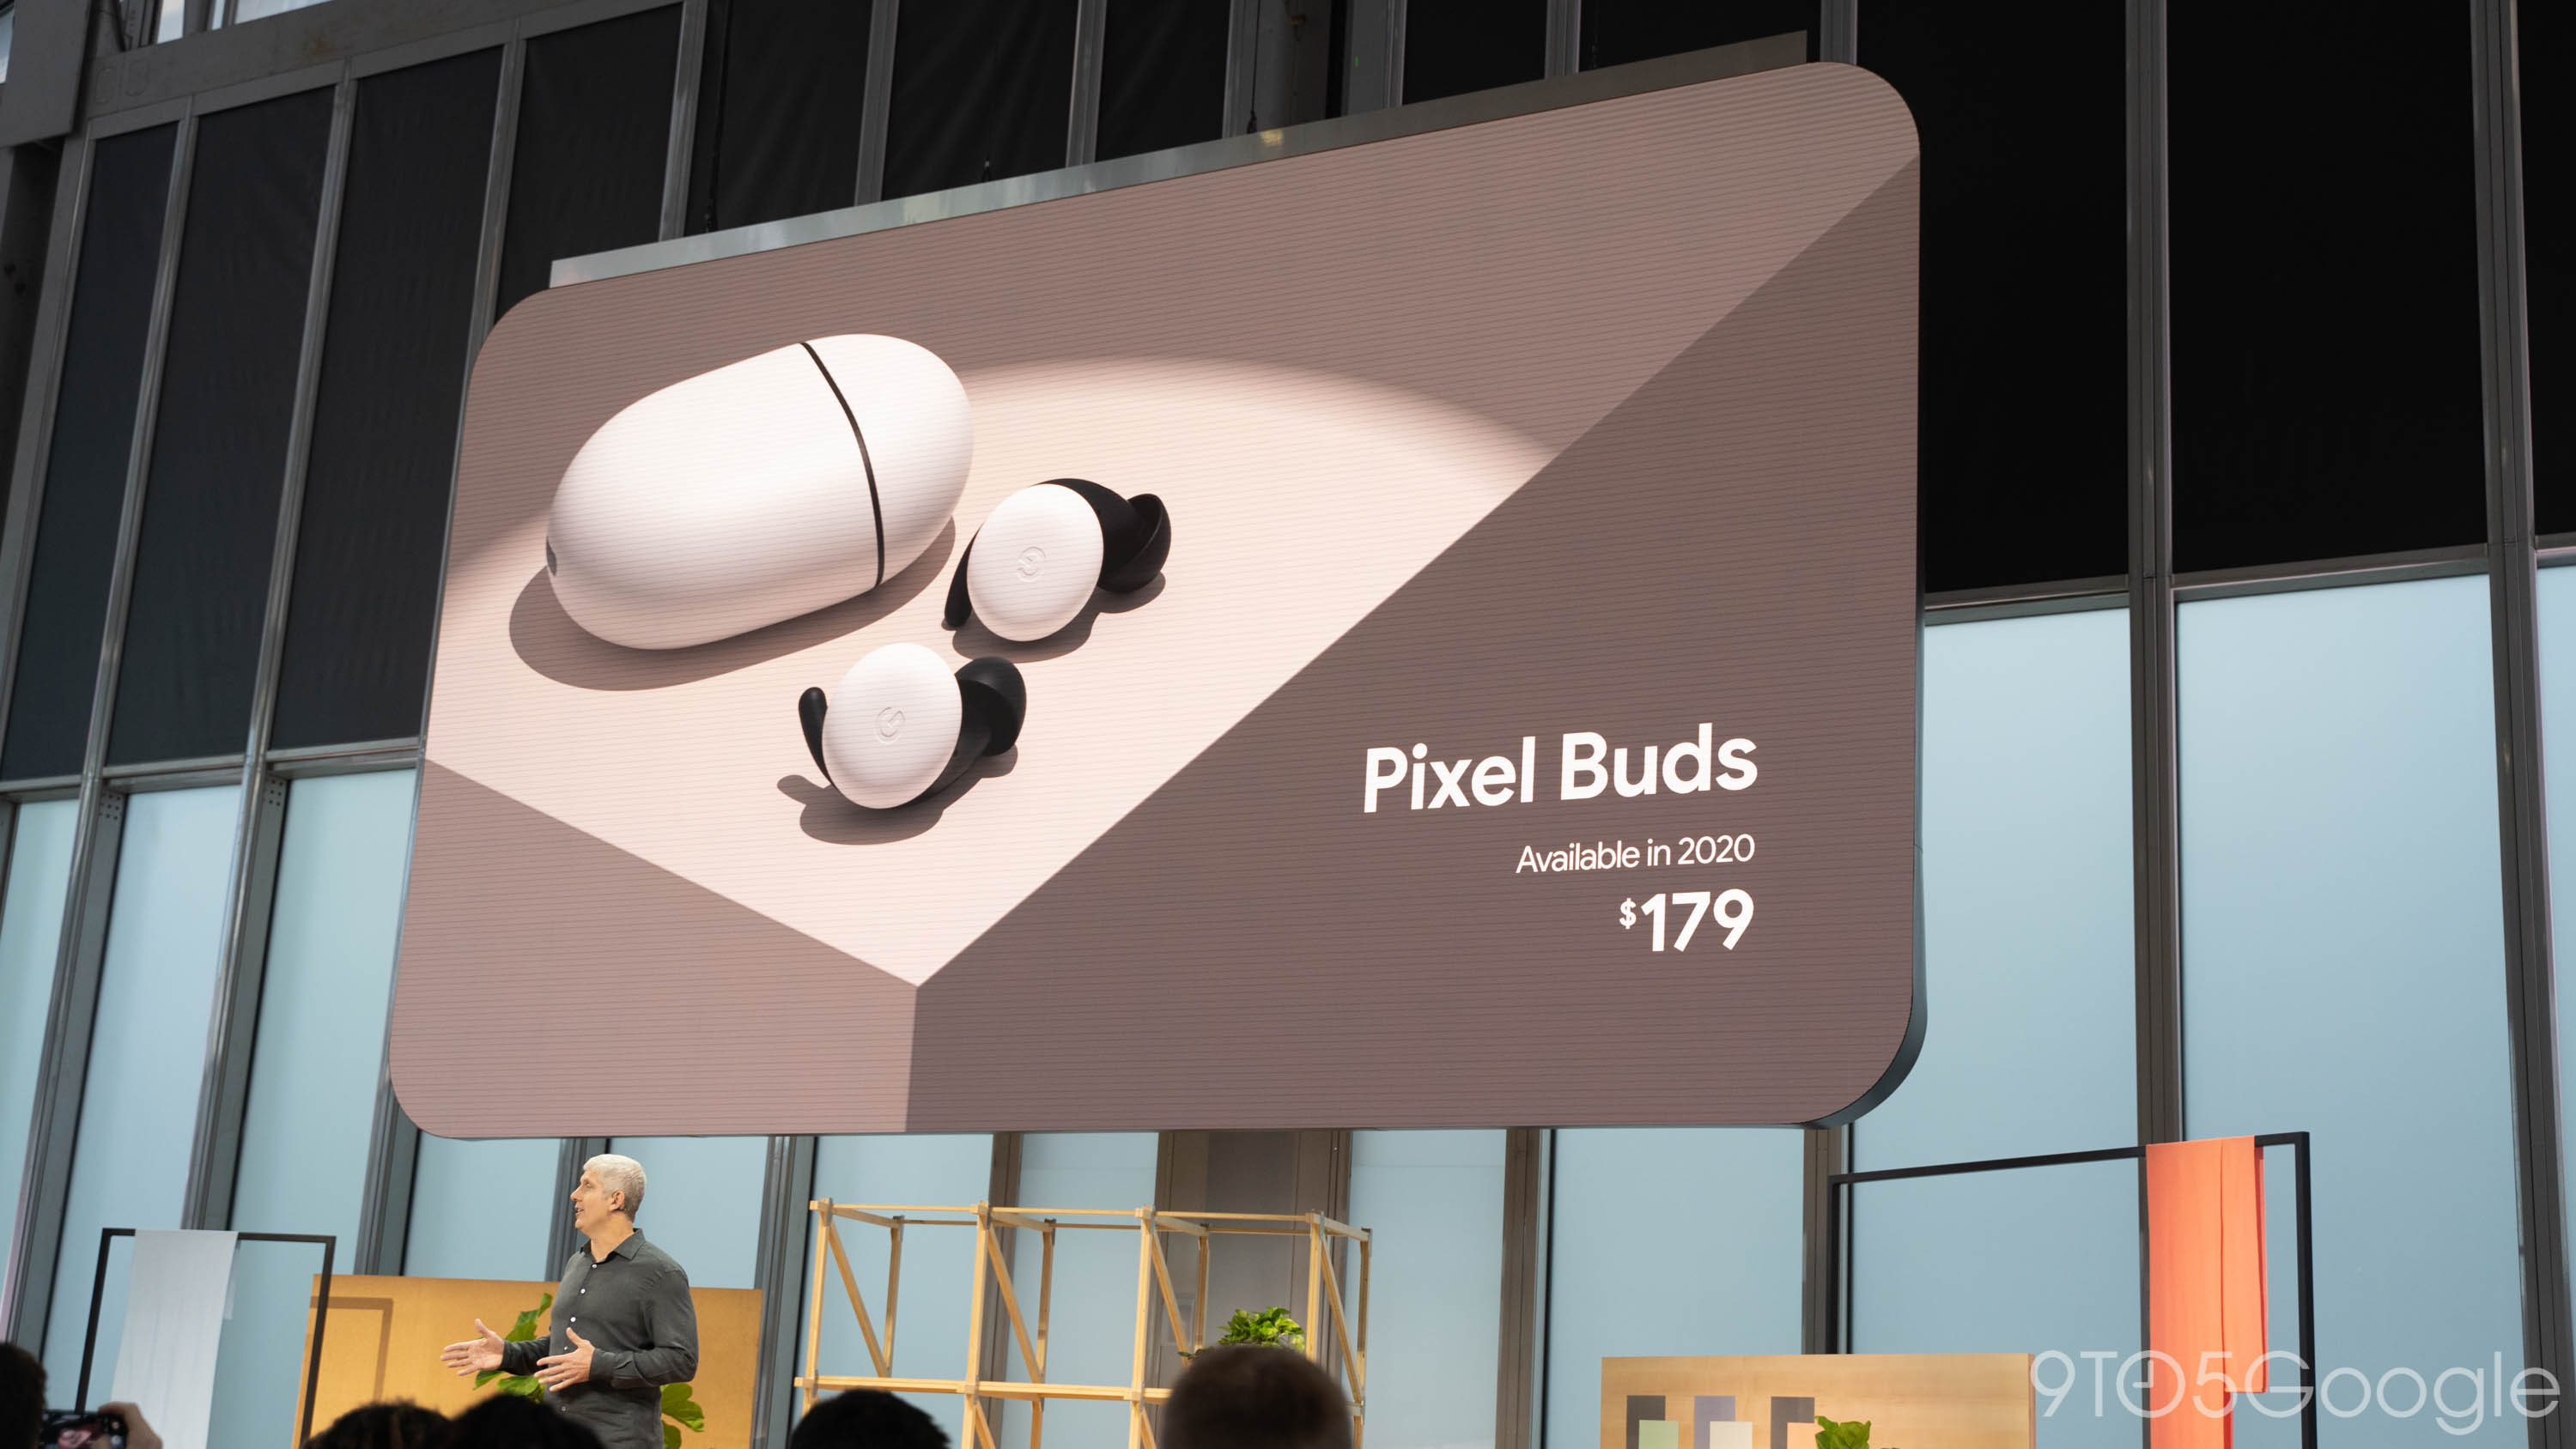 Google announces new Pixel Buds w/ $179 price-tag, more - 9to5Google